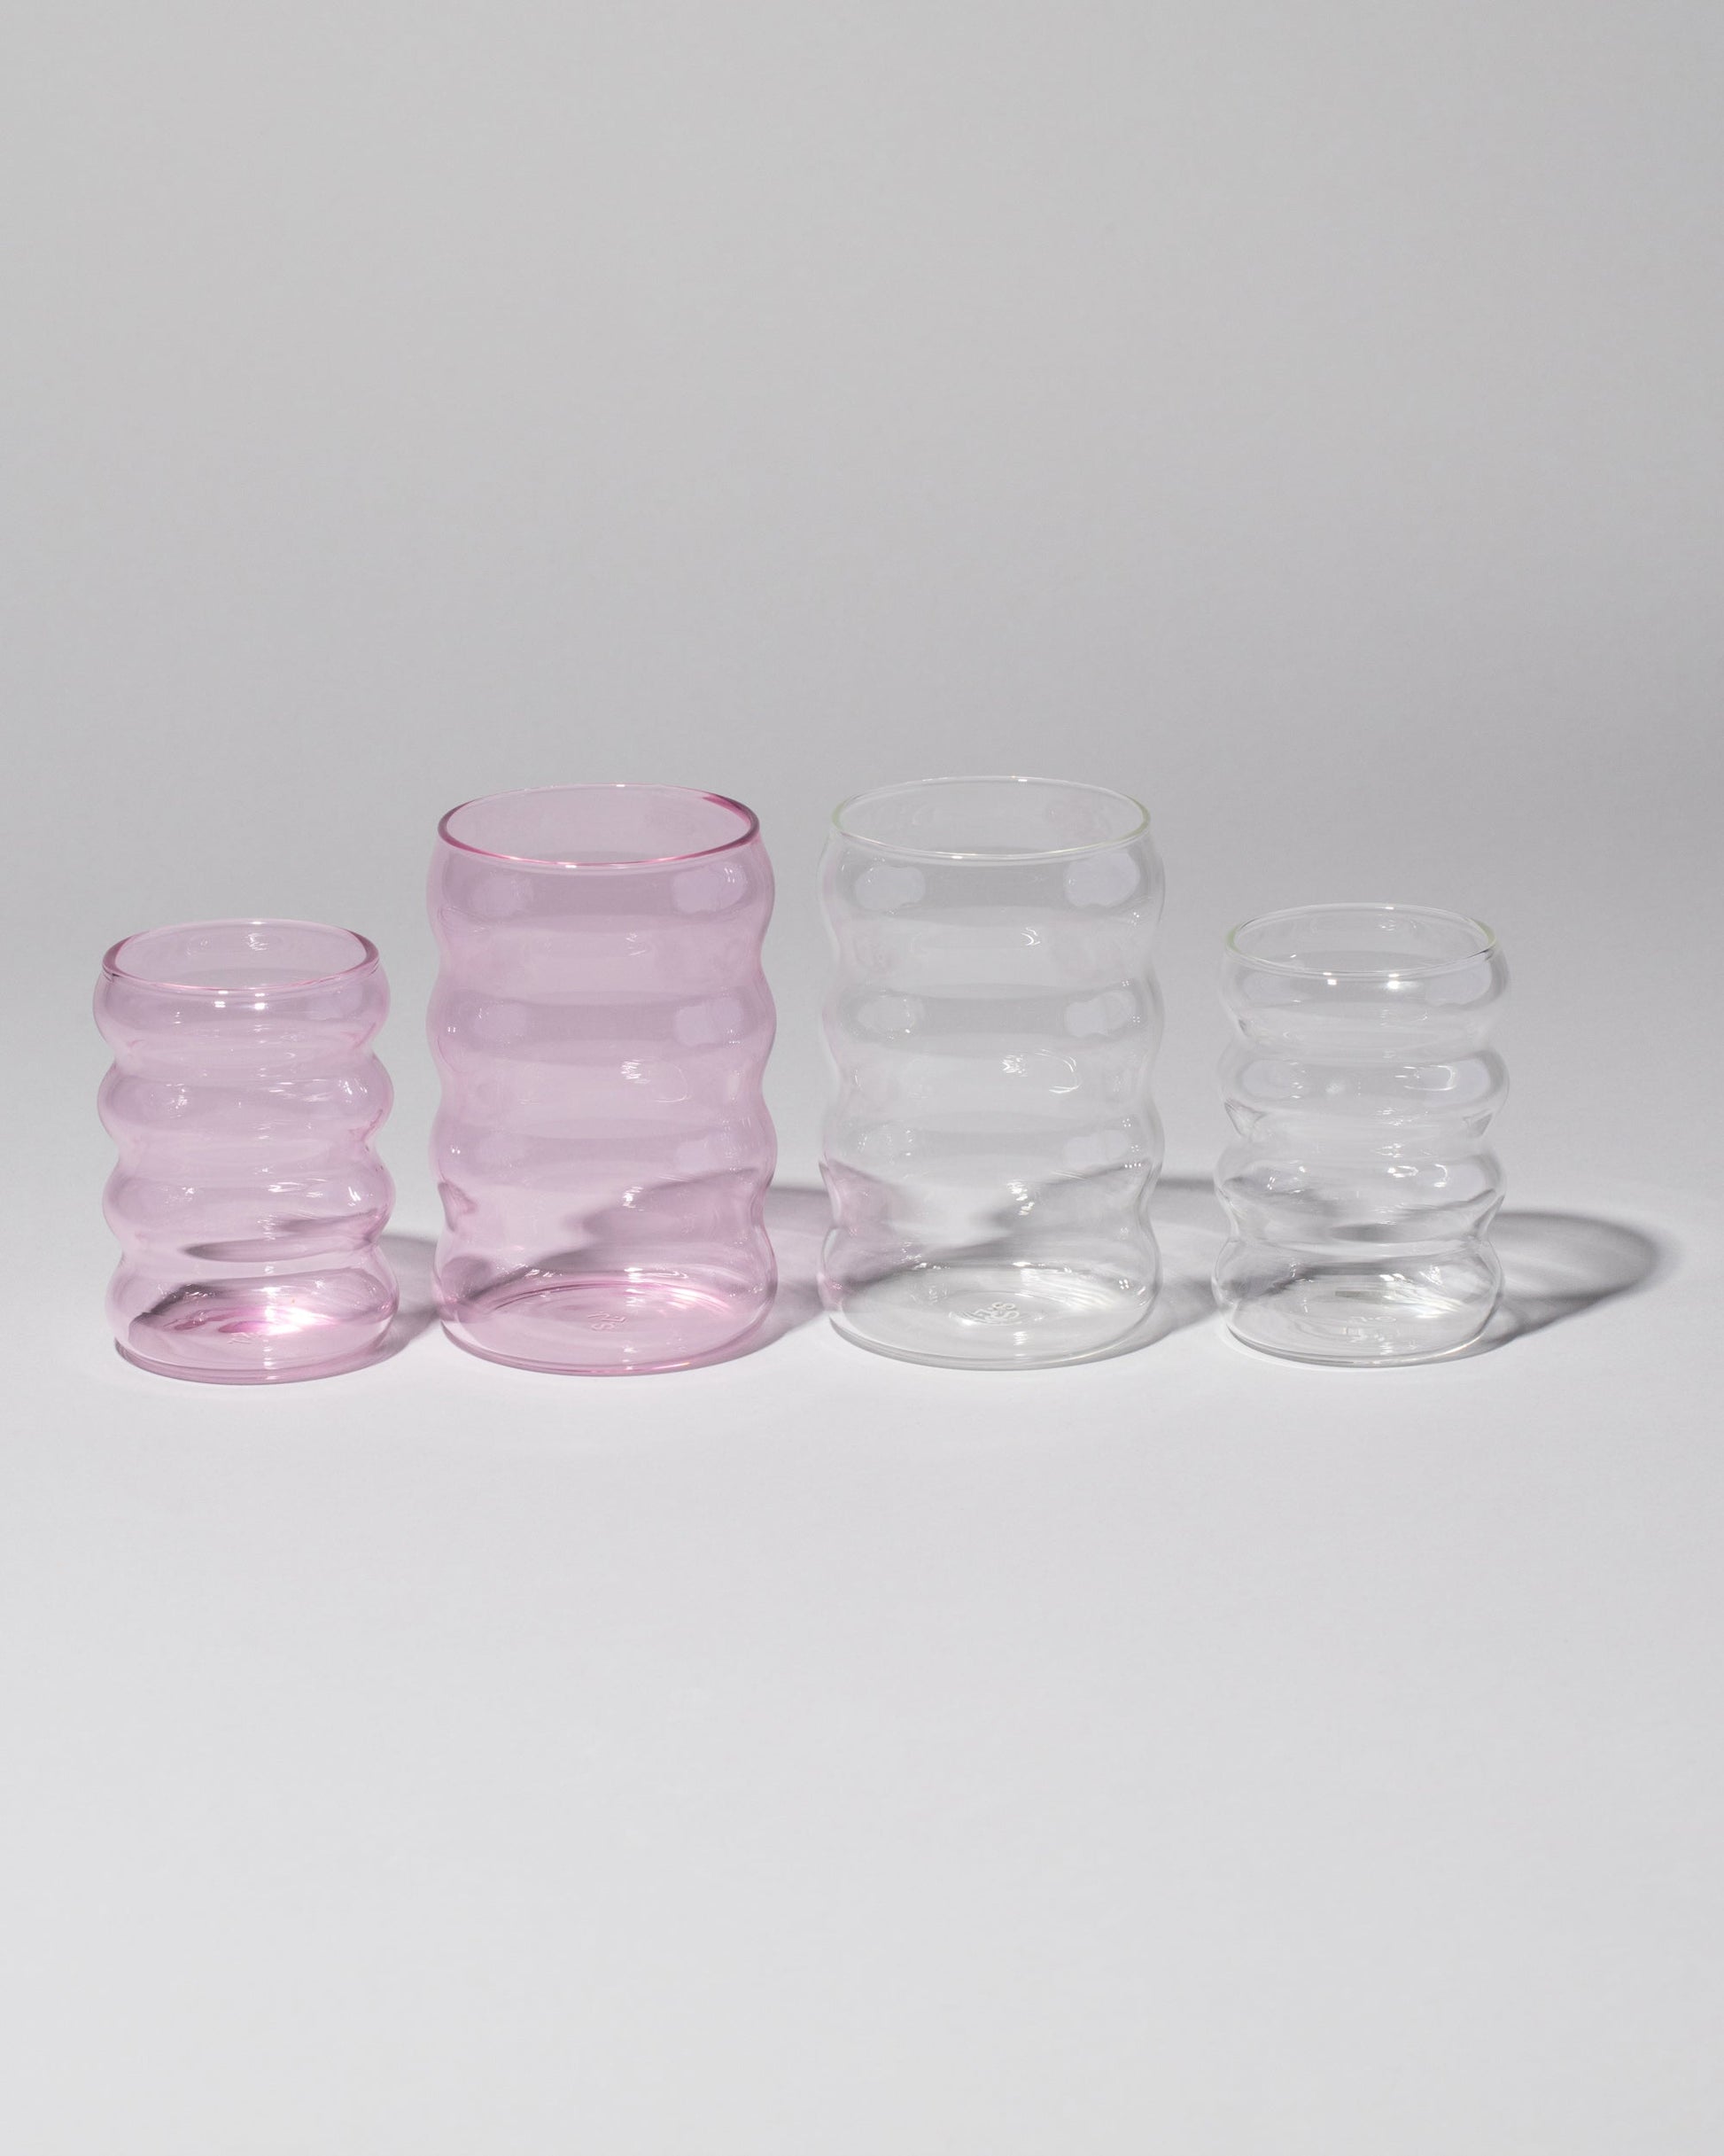 Group of Sophie Lou Jacobsen Small Pink, Large Clear, Small Clear and Large Pink Single Ripple Cups on light color background.